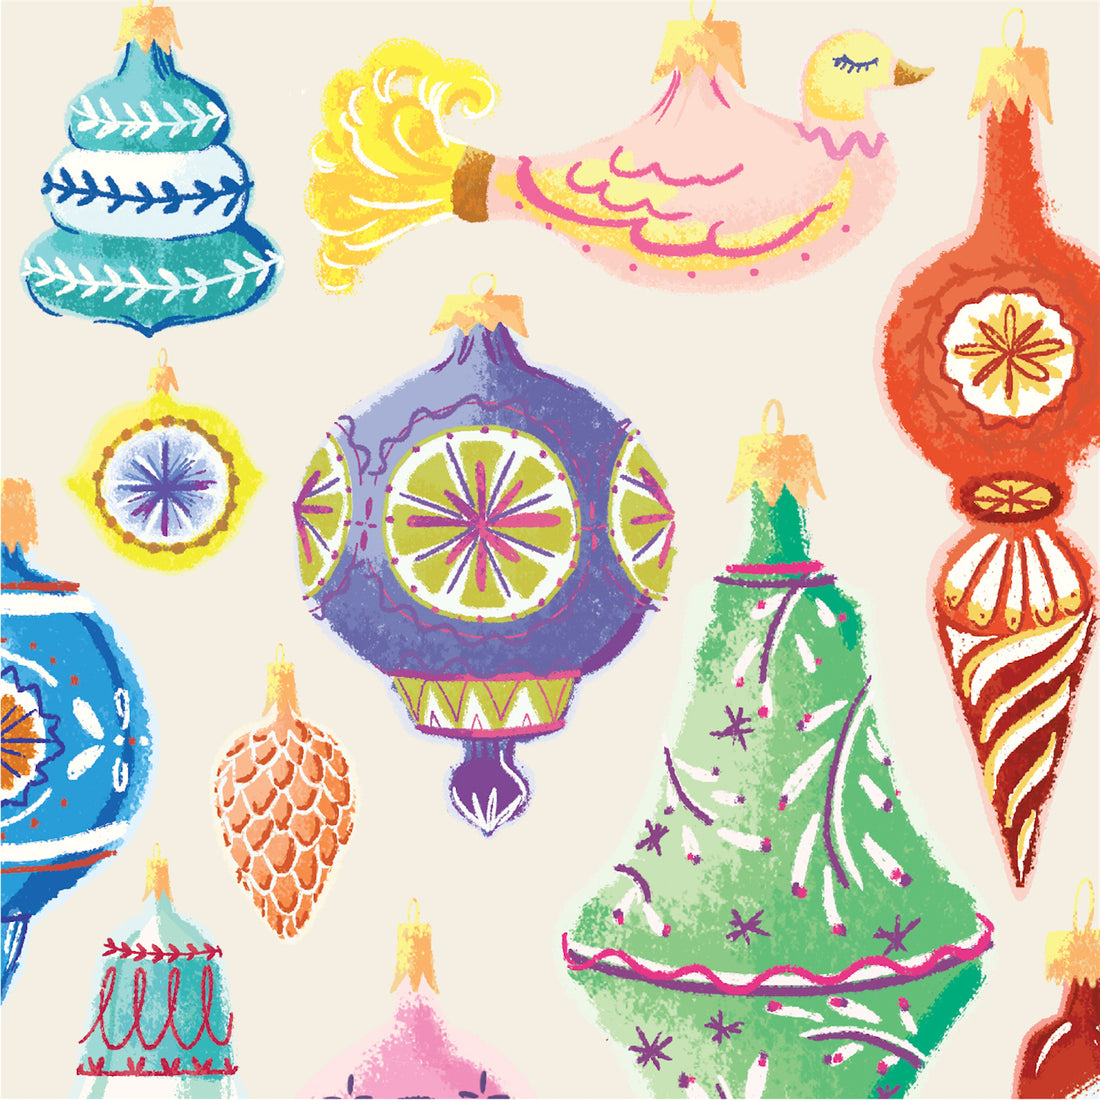 A square cocktail napkin featuring whimsical illustrations of colorful vintage Christmas ornaments on a cream background.